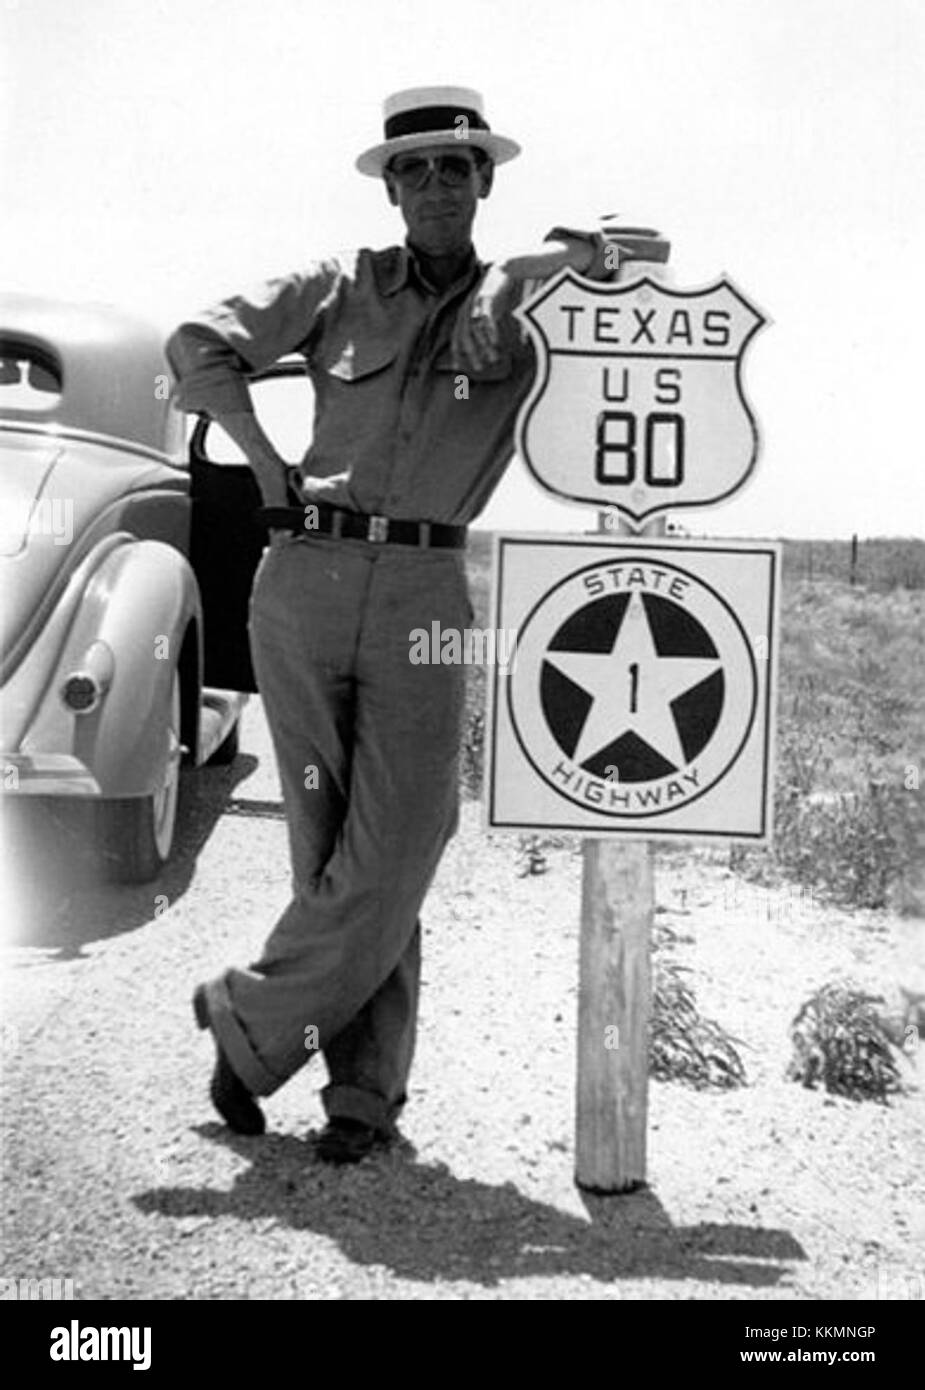 US Route 80 e Texas Highway 1 Foto Stock